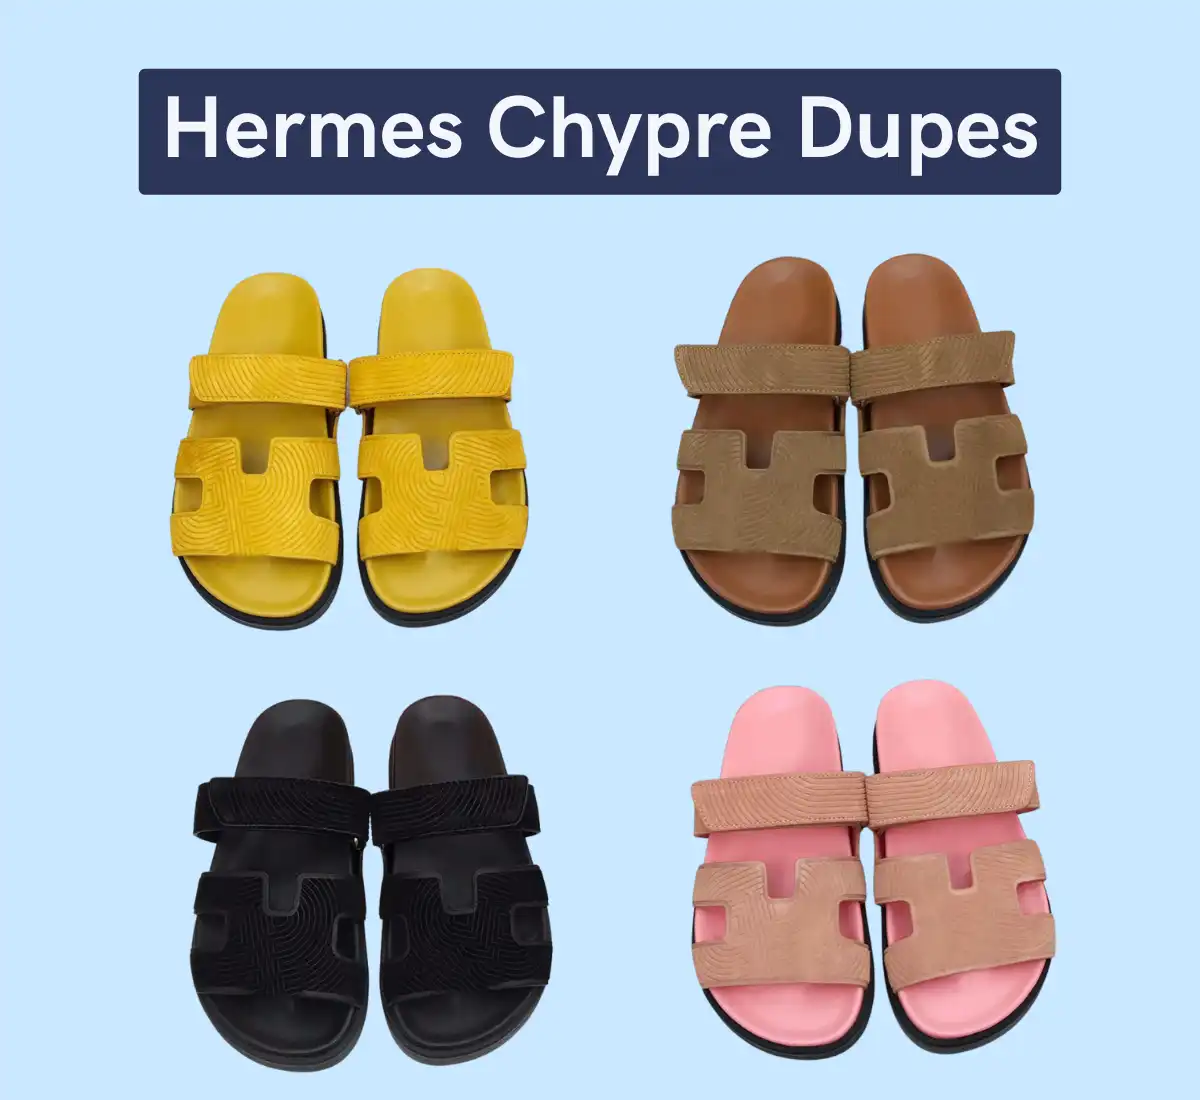 3 best hermes chypre sandals dupes (from $50)